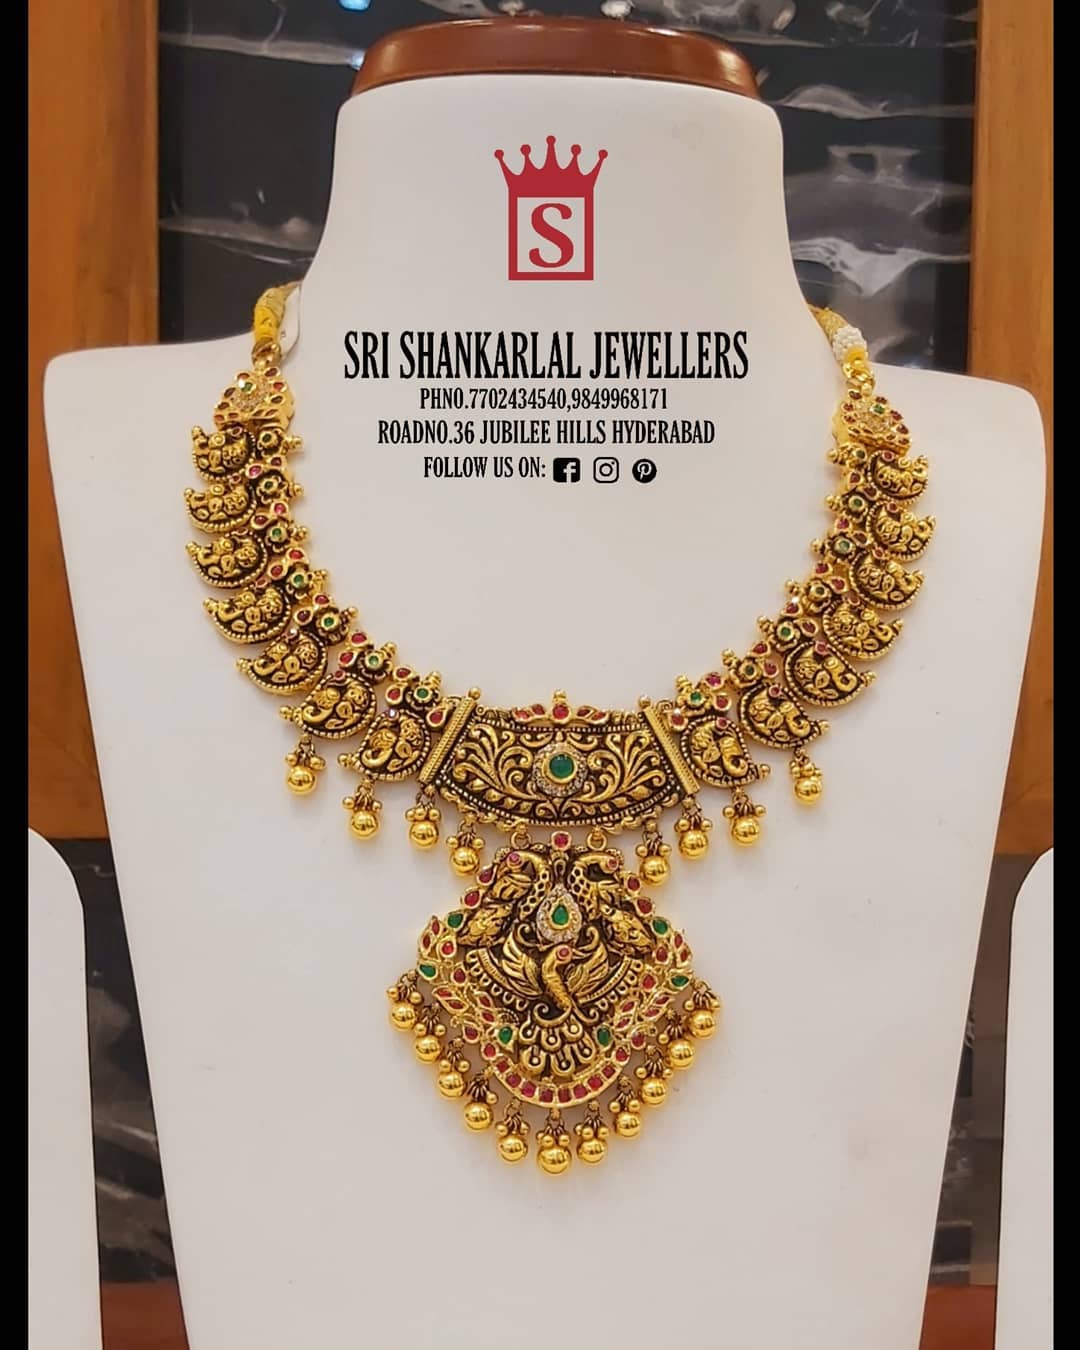 Find Pretty Bridal Antique Jewellery Collections Here! • South India Jewels